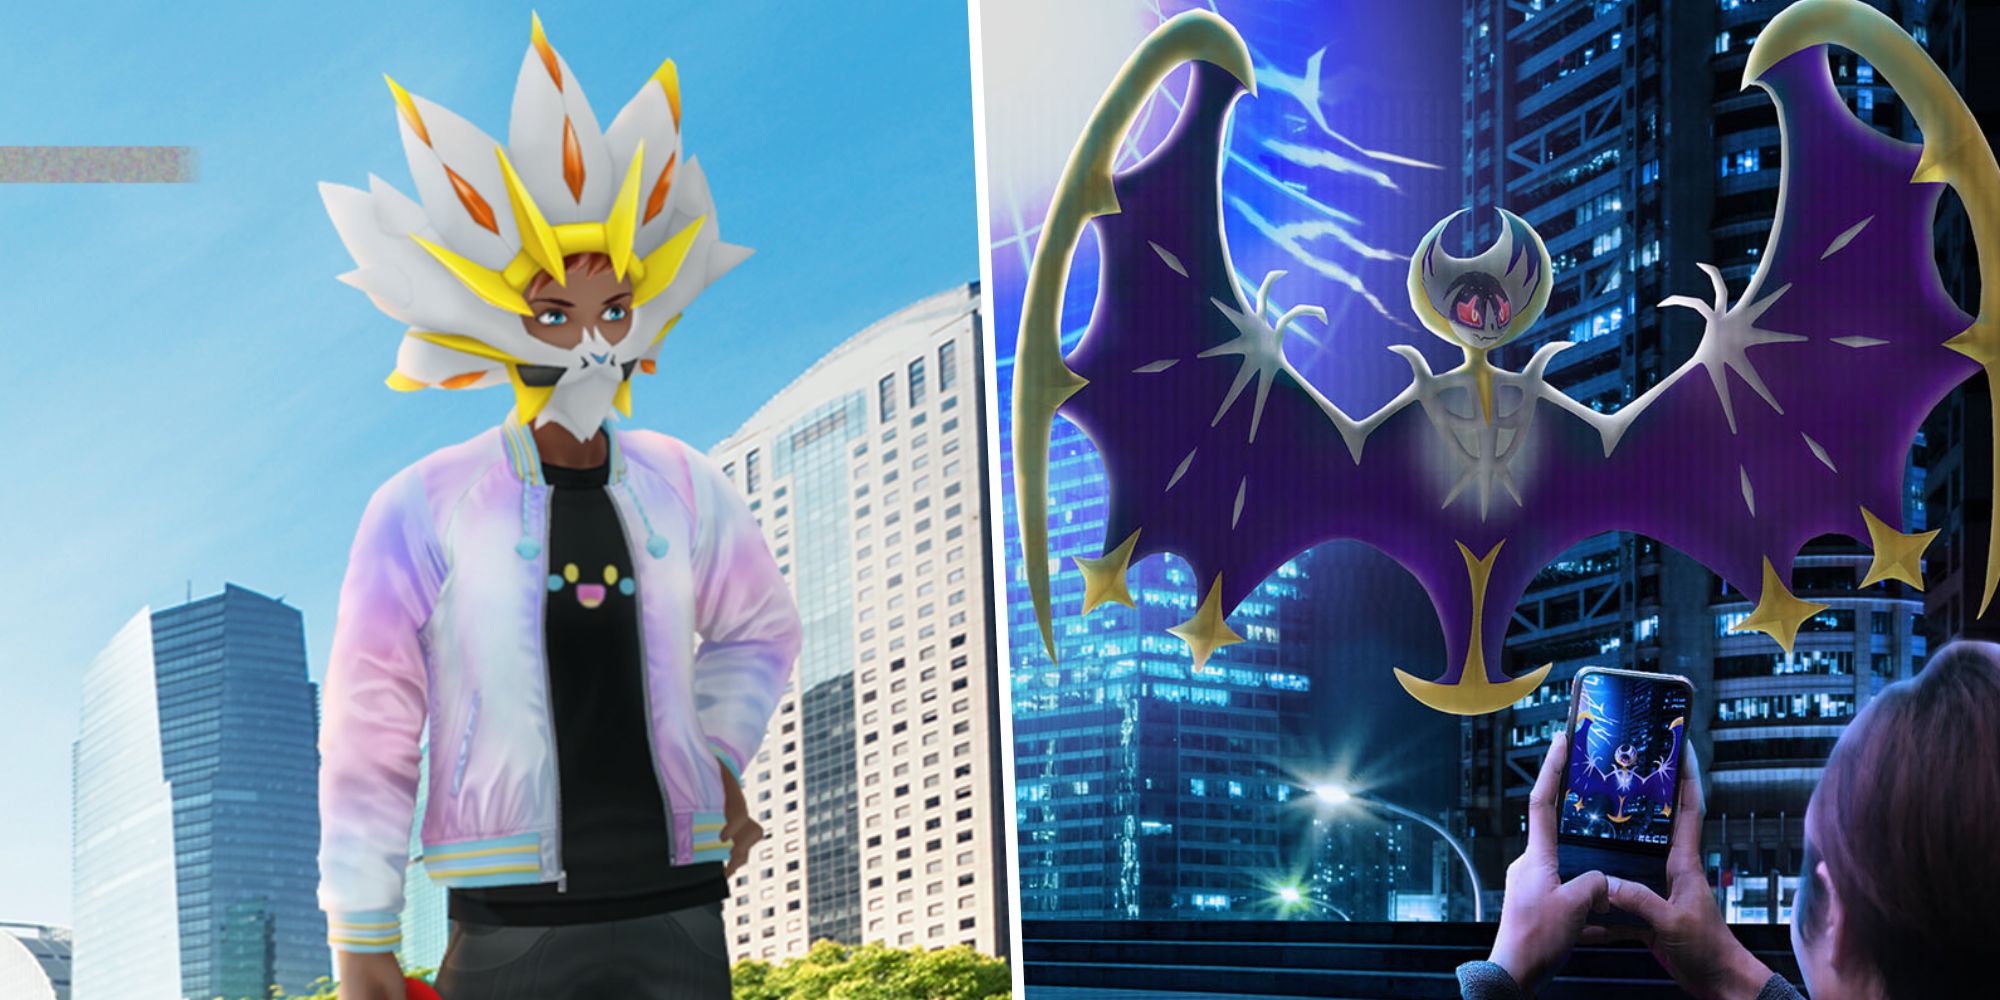 Be the star of the Astral Eclipse event! – Pokémon GO